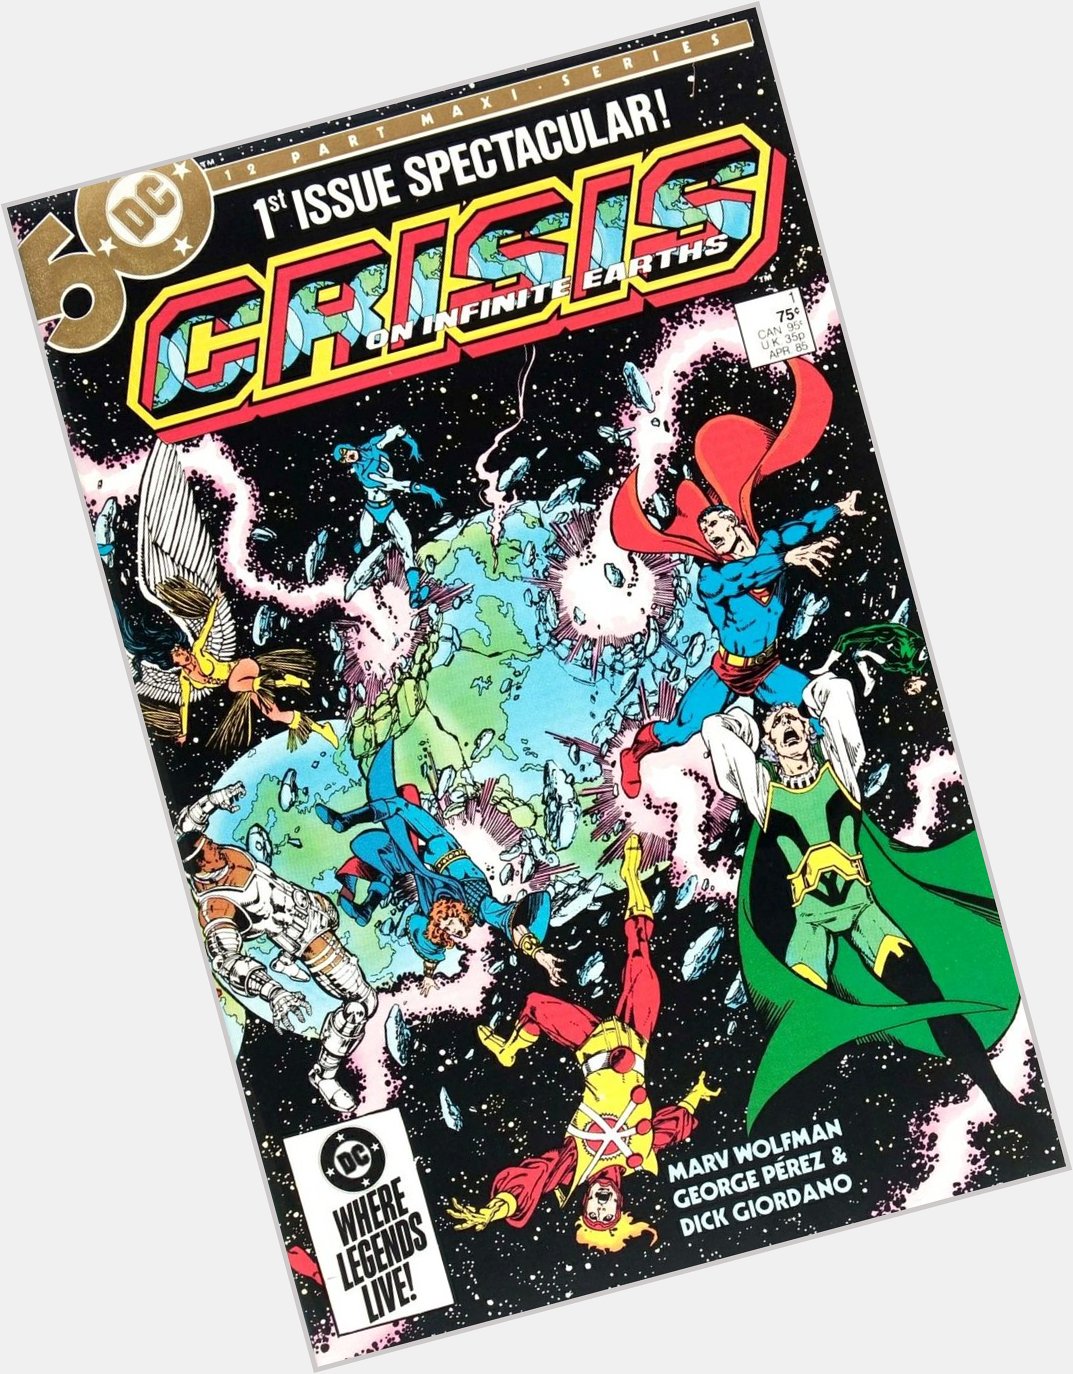 Happy Birthday to George Pérez! This is one of his greatest works, Crisis on Infinite Earths (1985). 